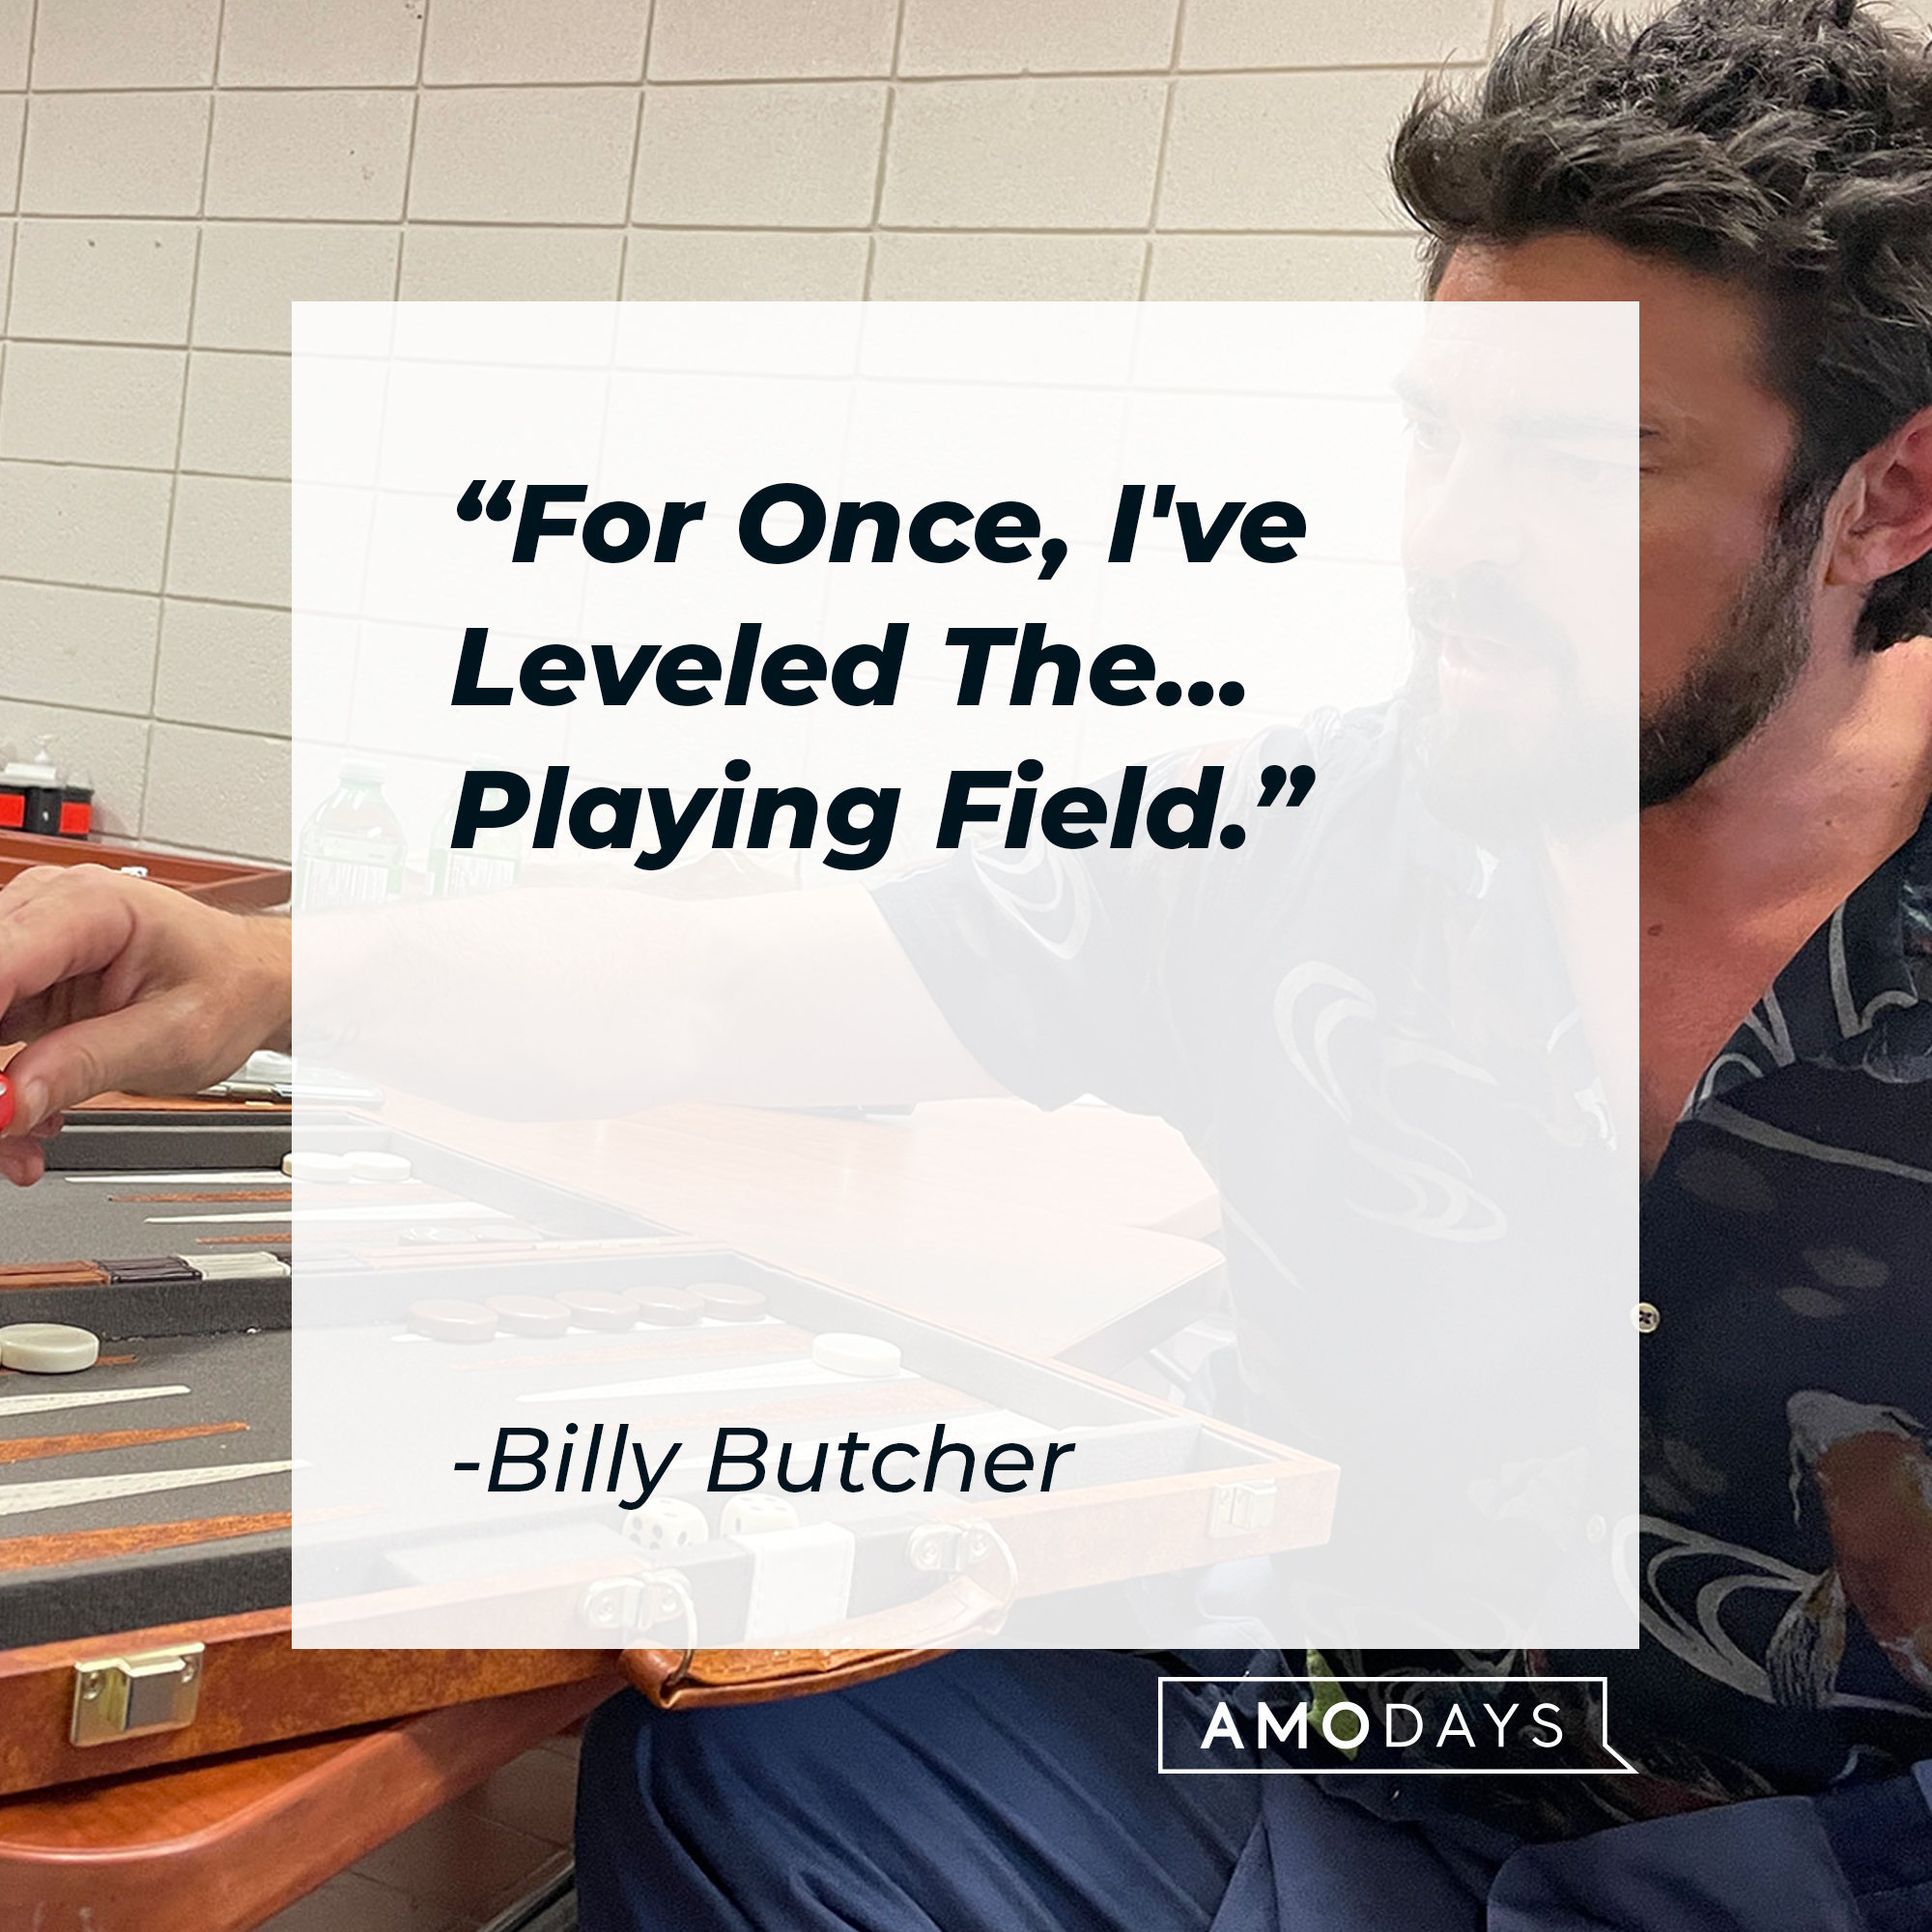 Billy Butcher's quote: "For Once, I've Leveled The...Playing Field." | Source: Facebook.com/TheBoysTV